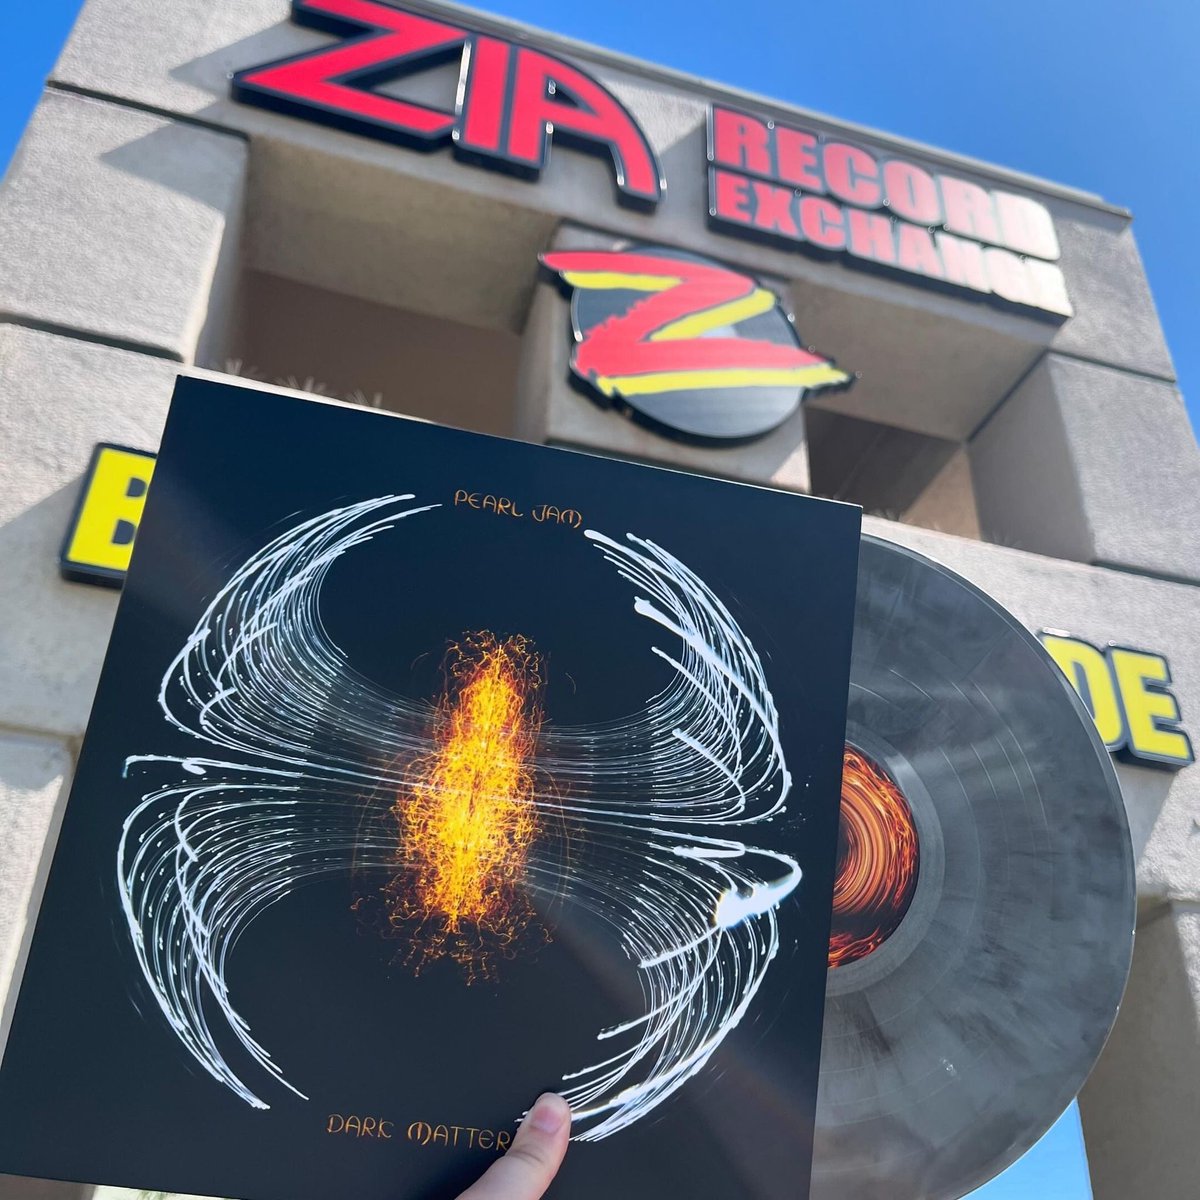 Pick up Dark Matter from your local record store today. 📸: @ziarecords